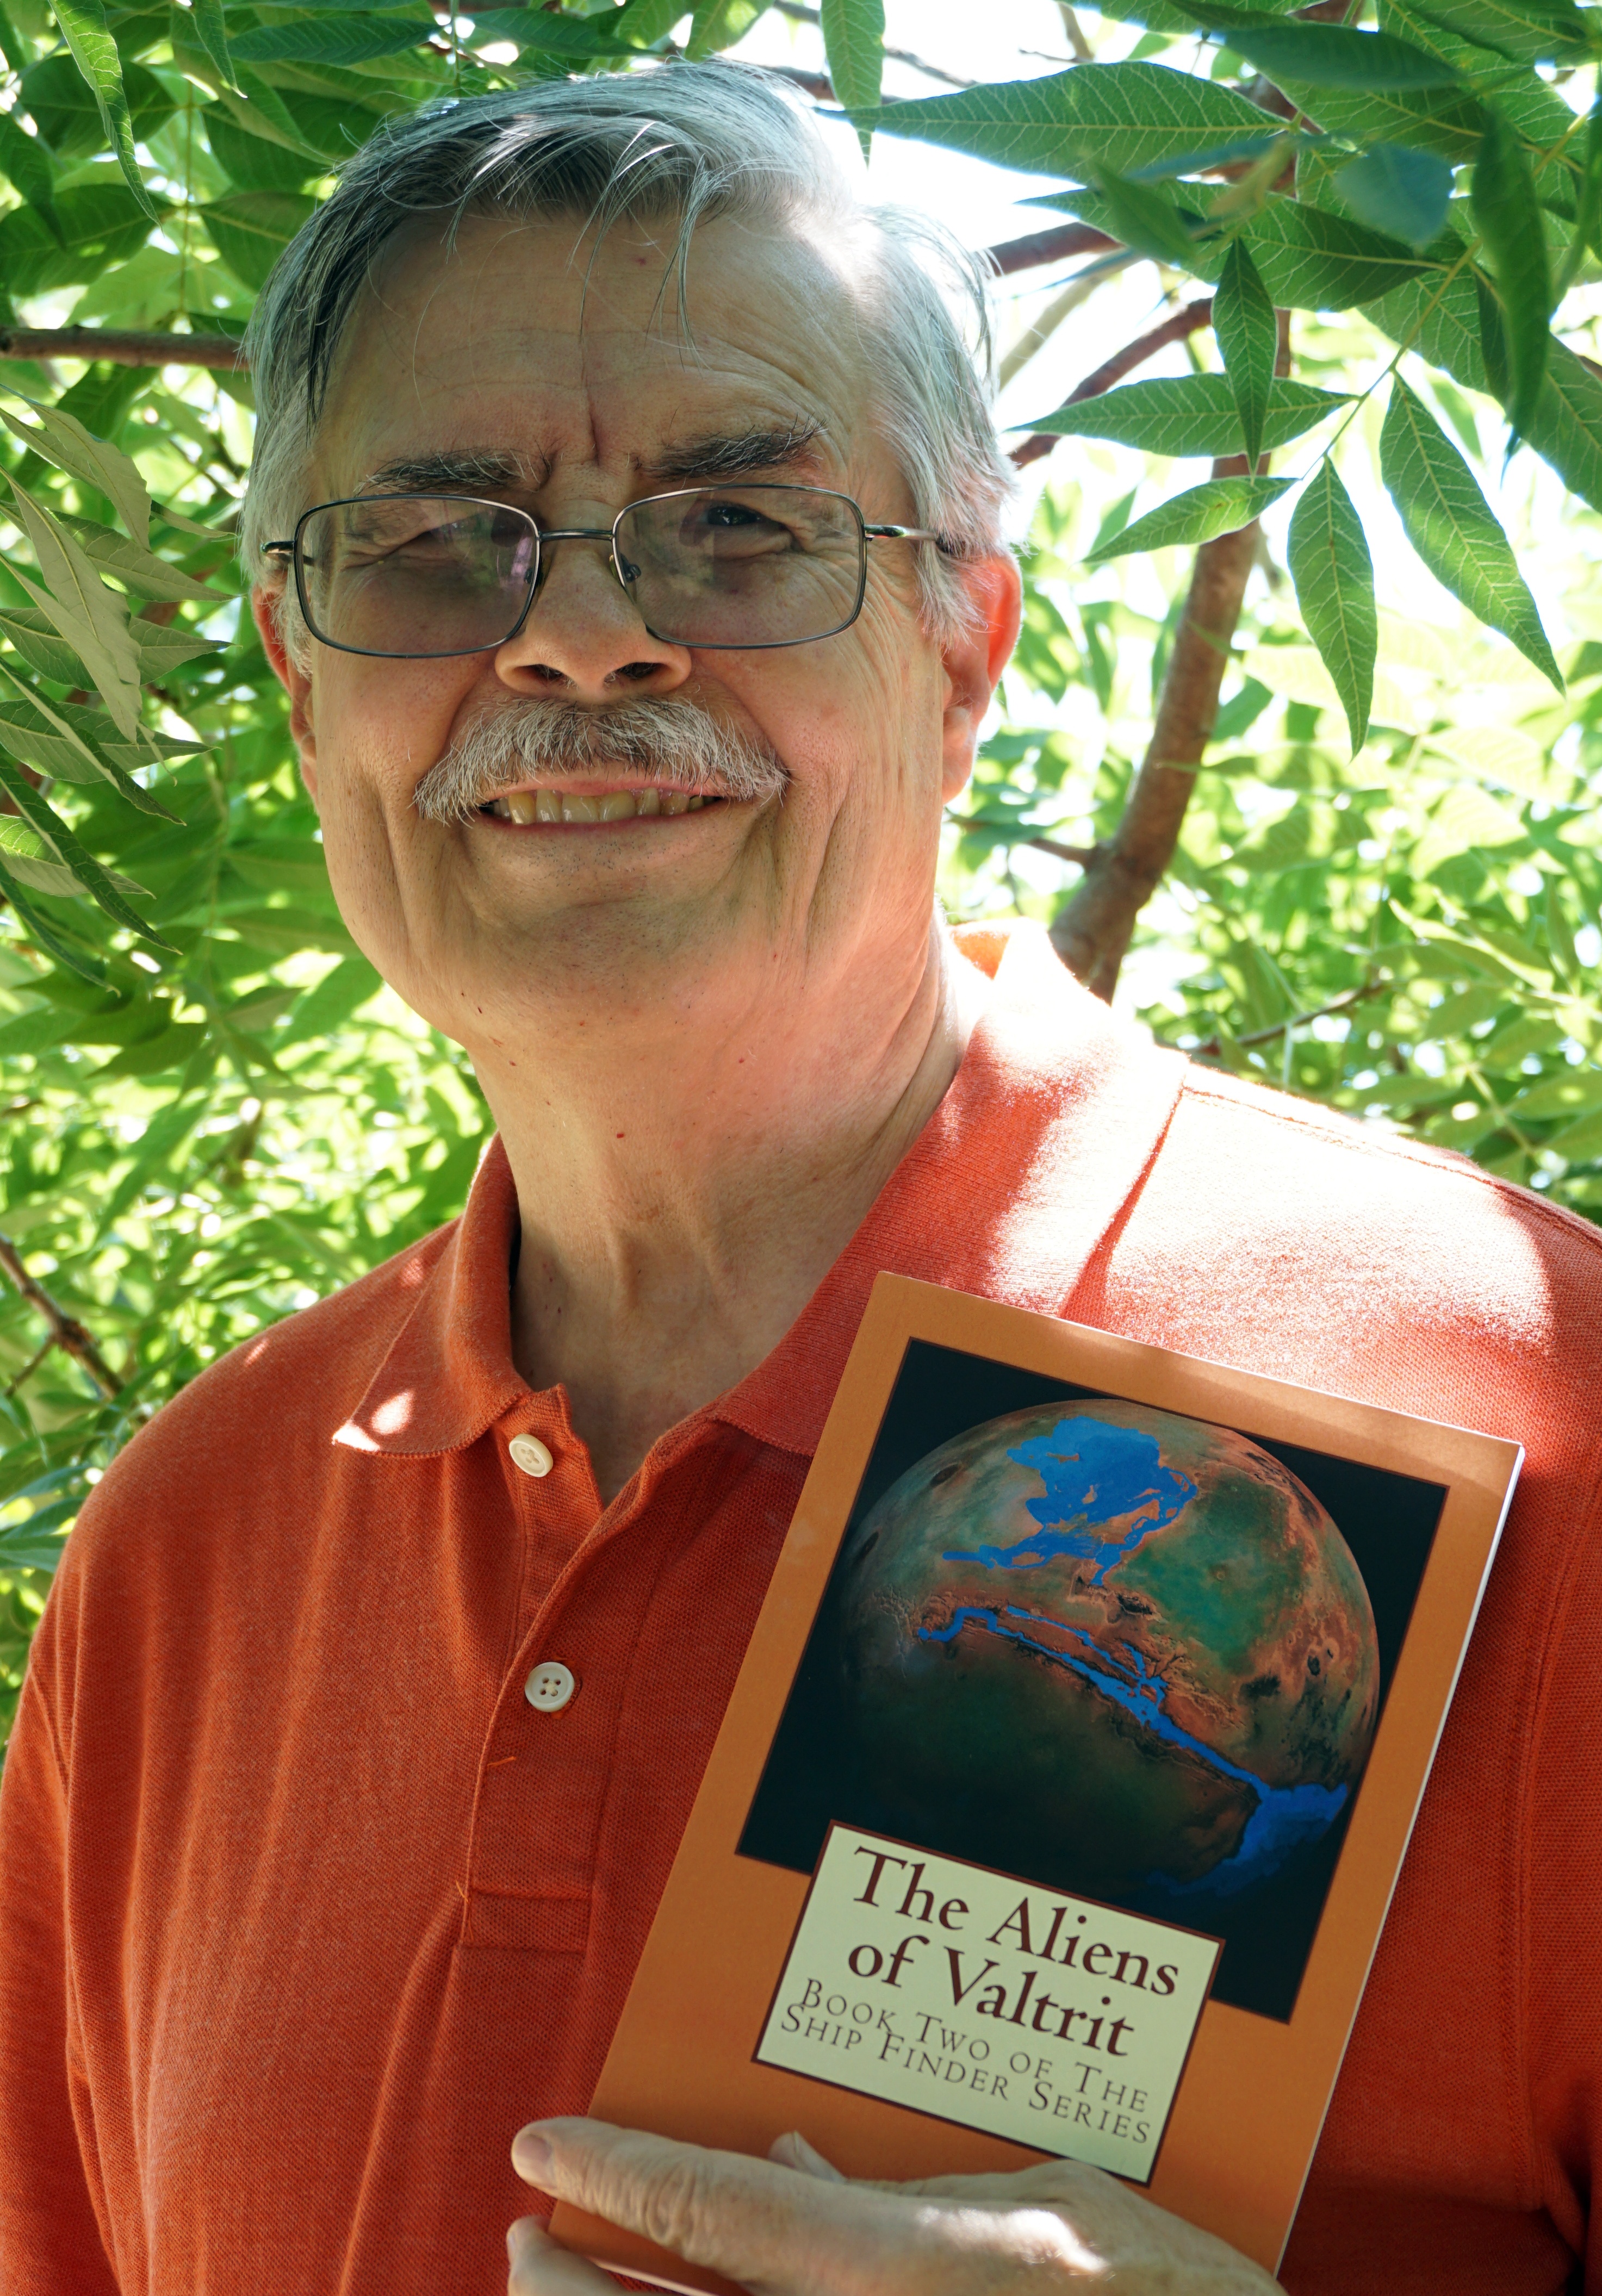 Author John G Bluck with a copy of his sci-fi novel, "The Aliens of Valtrit."